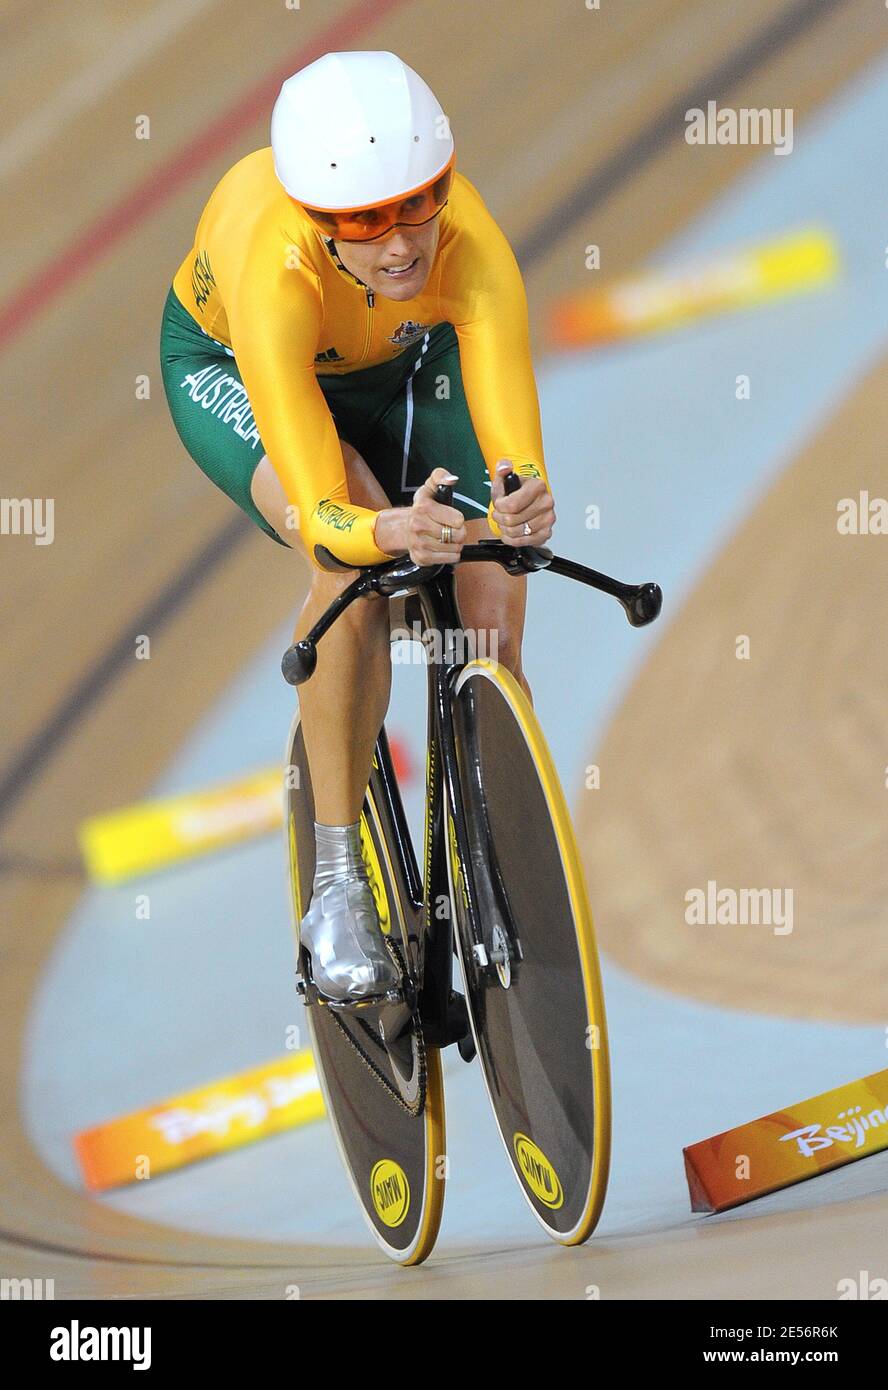 Australia's Katie Mactier competes on women's individual pursuit during the Beijing Olympic Games Day 7 at the Laoshan Velodrome in Beijing, China on August 15, 2008. Photo by Gouhier-Hahn-Nebinger/Cameleon/ABACAPRESS.COM Stock Photo